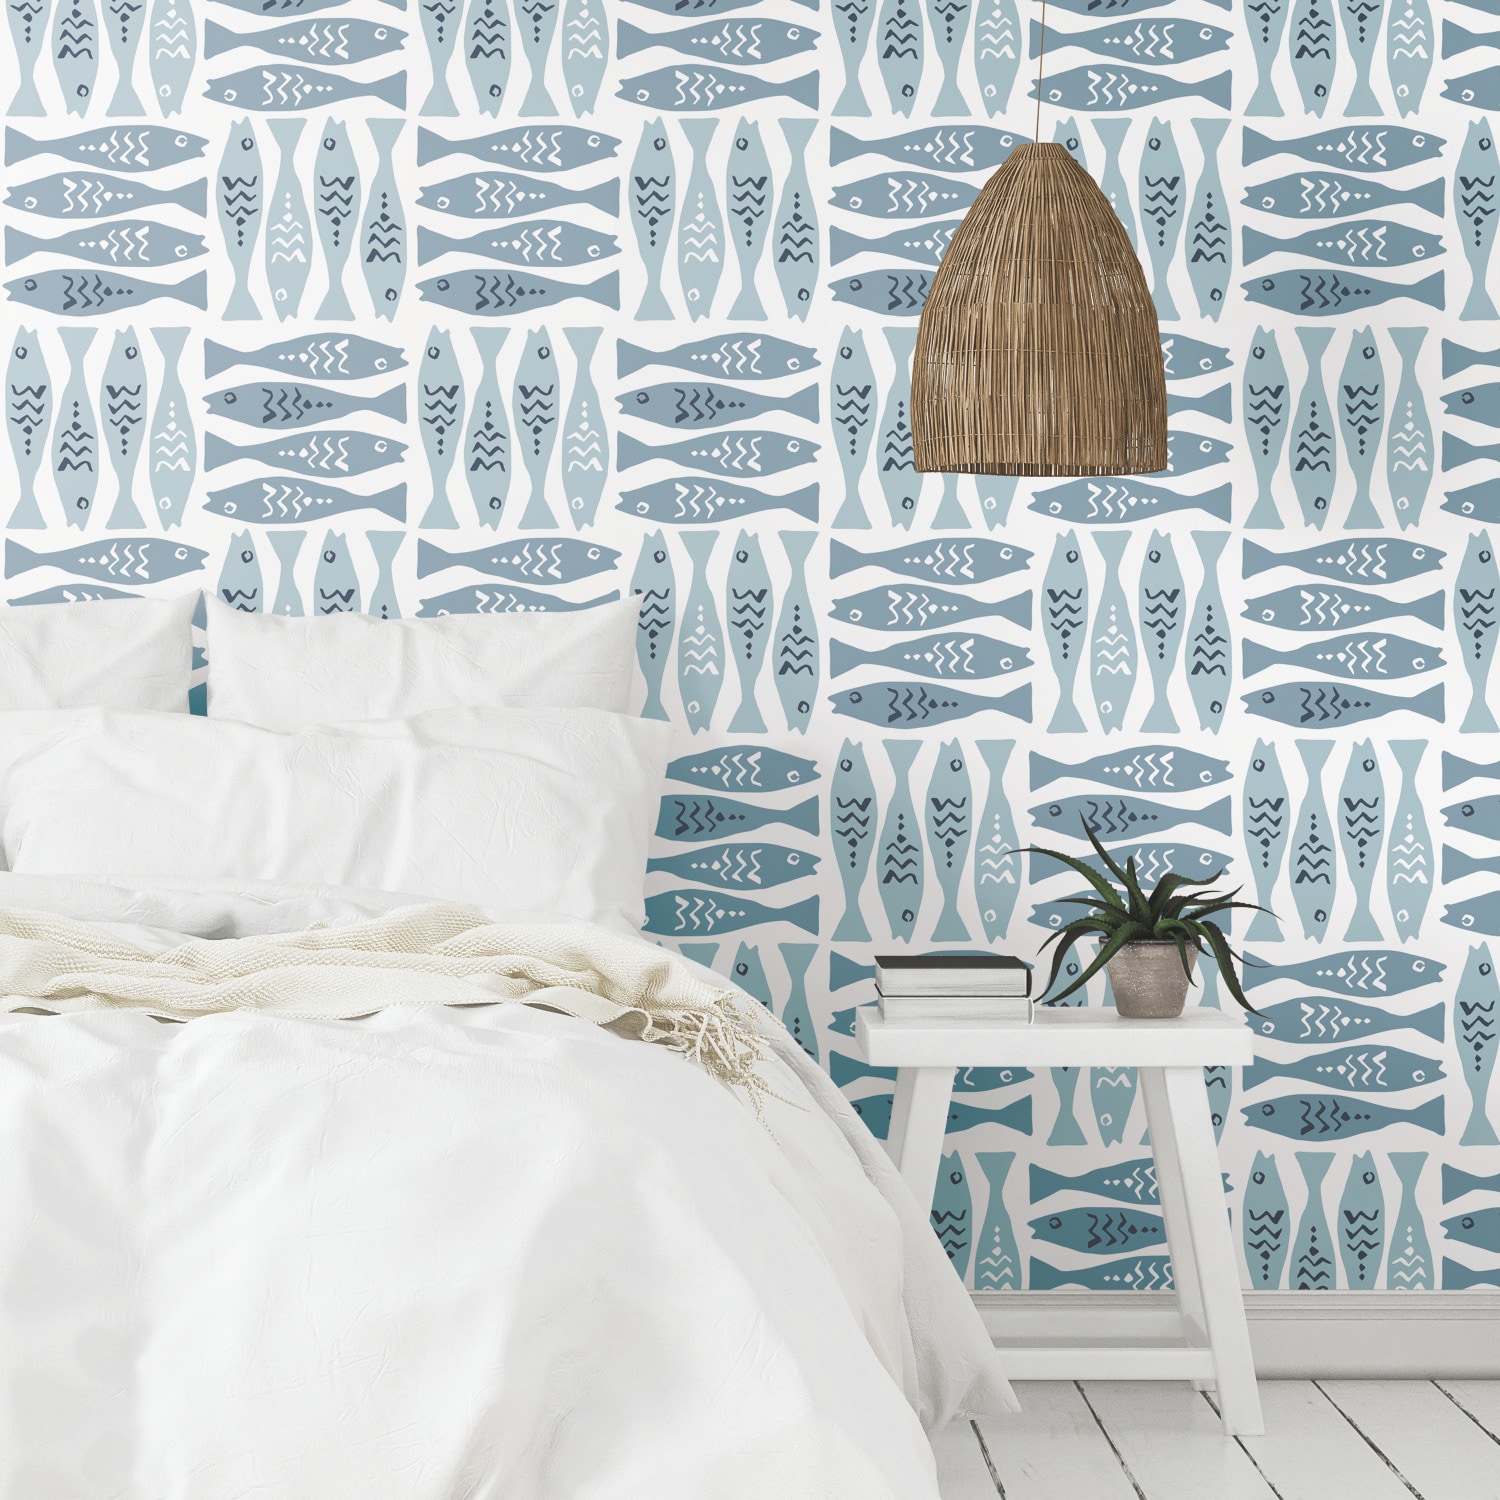 Buy Blue Fish Removable Wallpaper Beach Wall Decor Cabin Online in India   Etsy